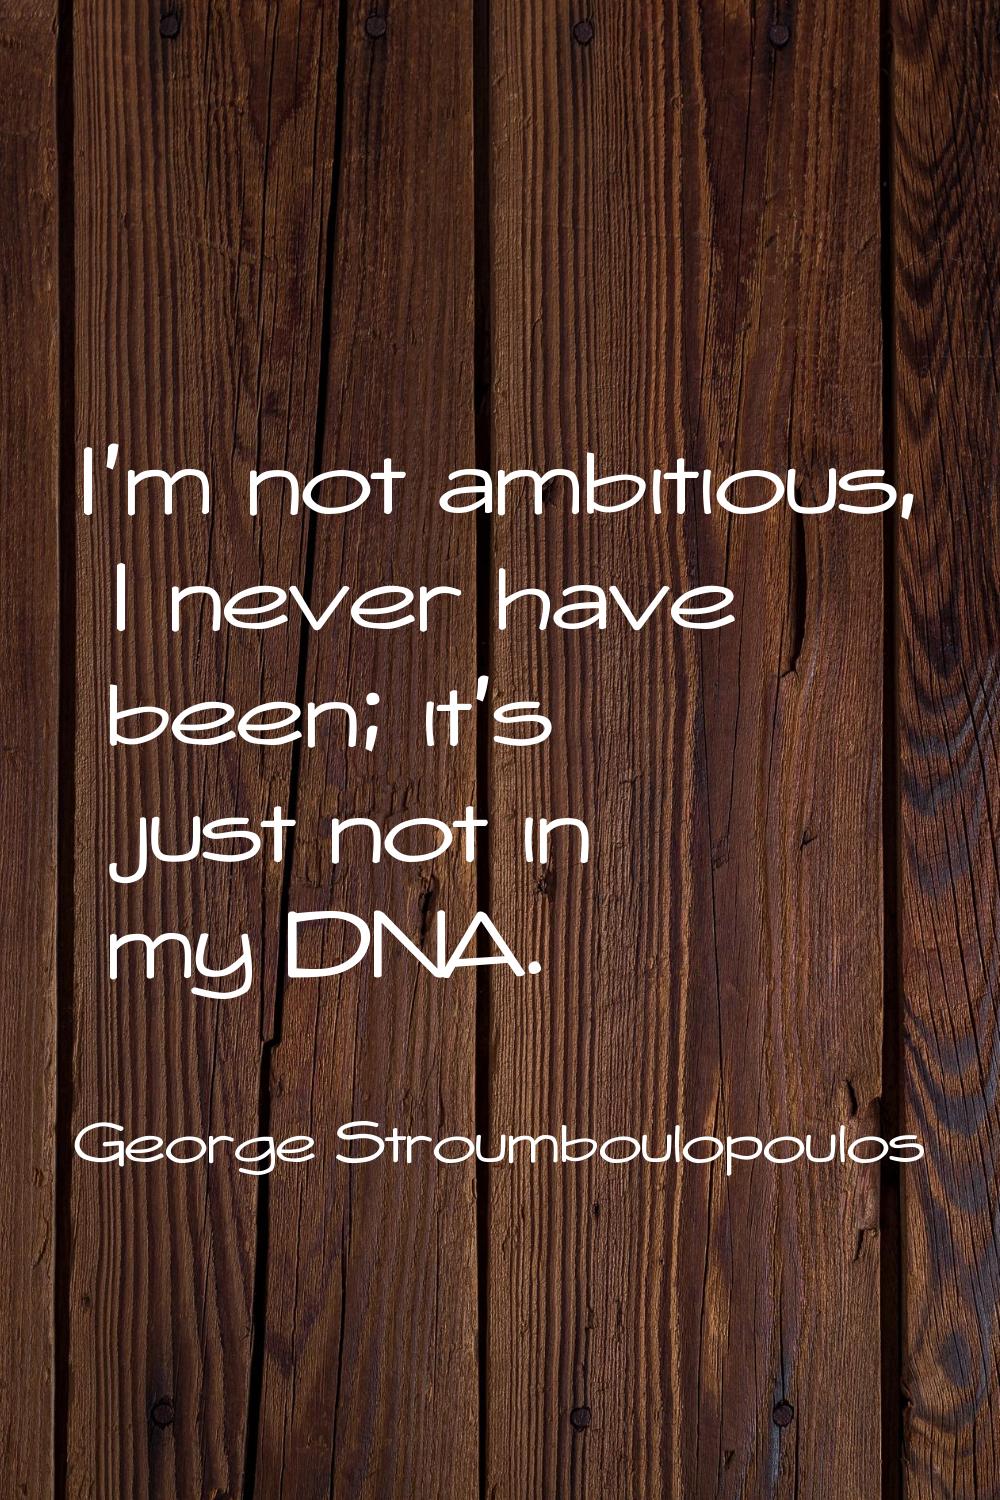 I'm not ambitious, I never have been; it's just not in my DNA.